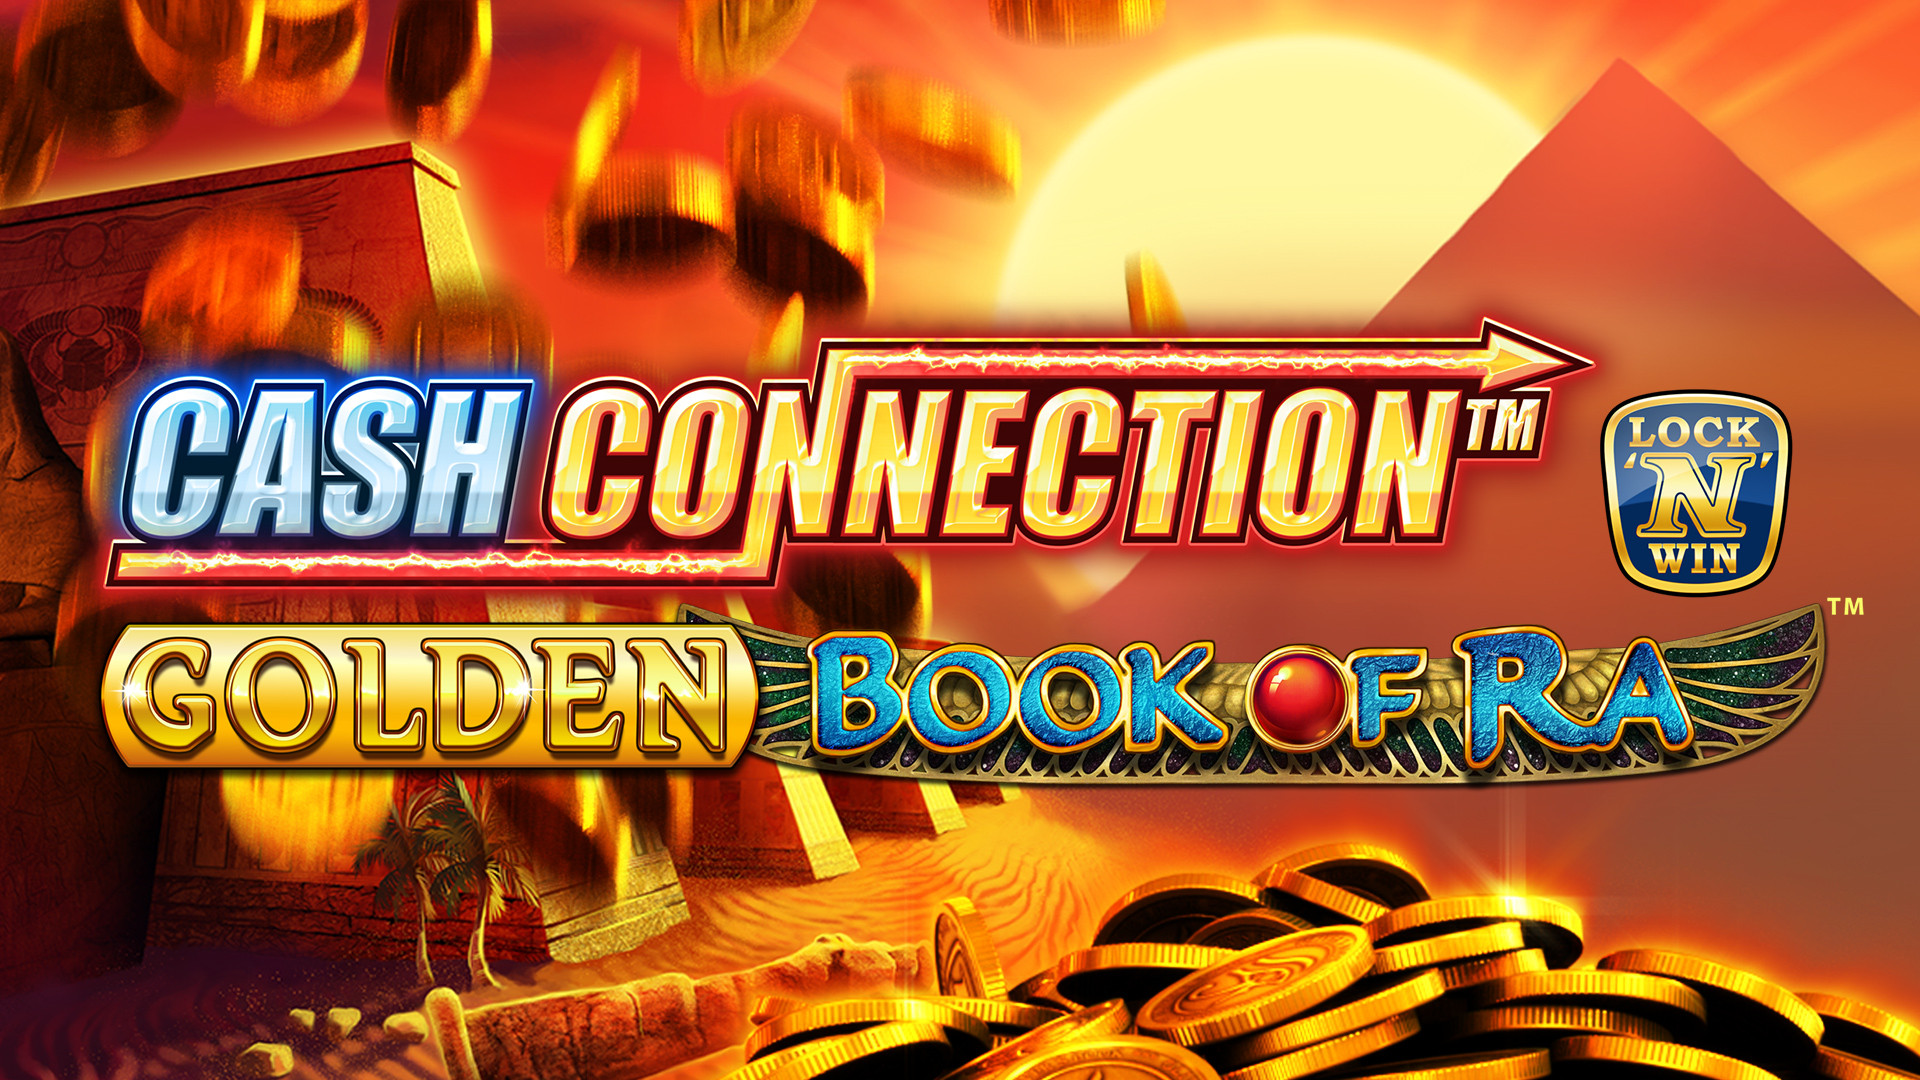 Cash Connection – Golden Book Of Ra